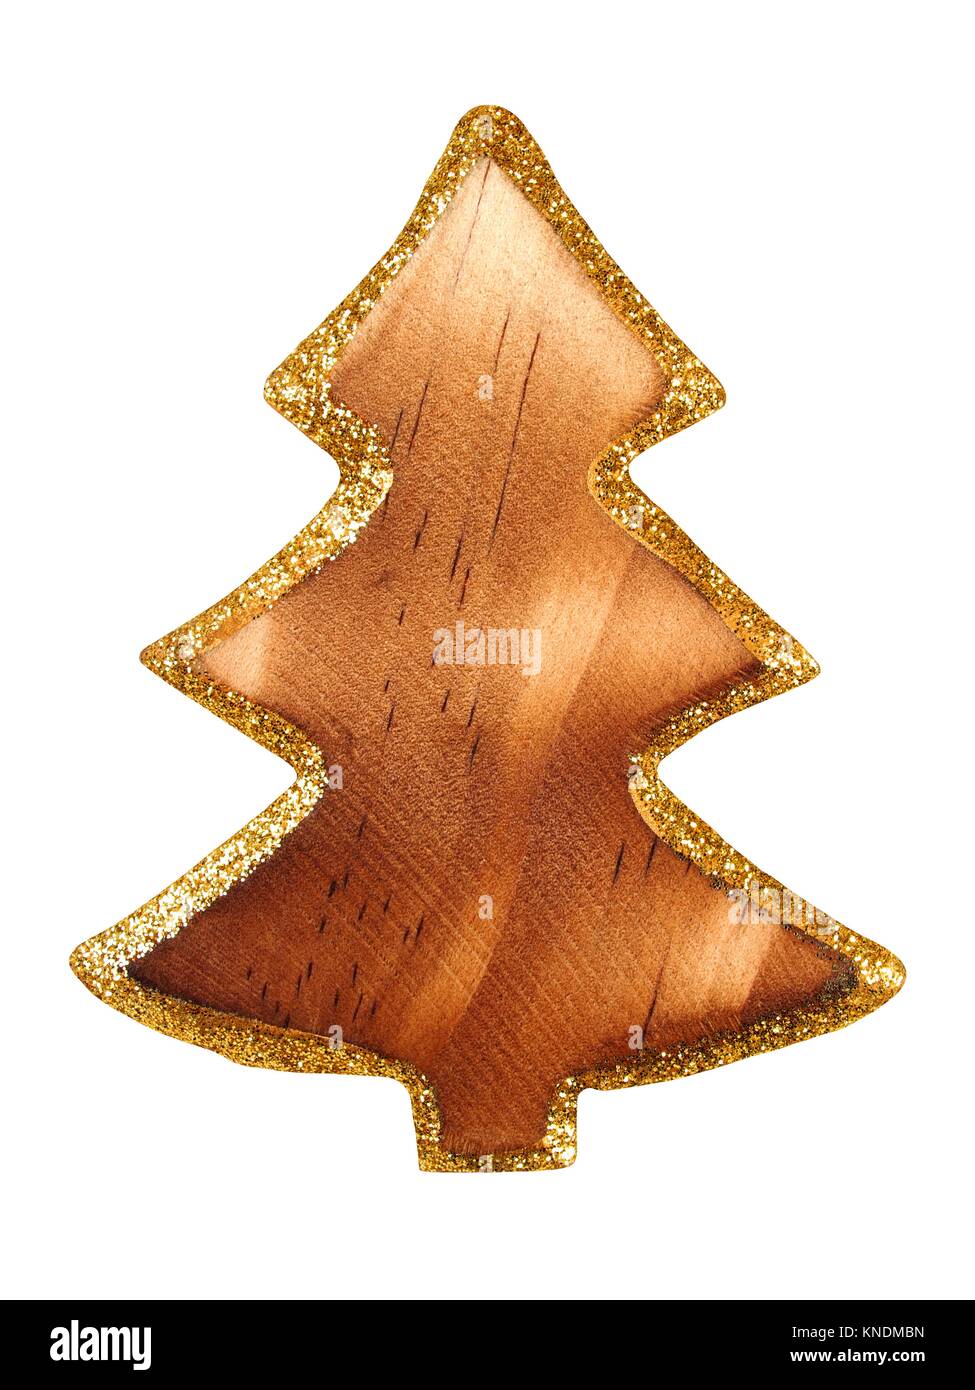 Wooden tree with gold border isolated on white Stock Photo